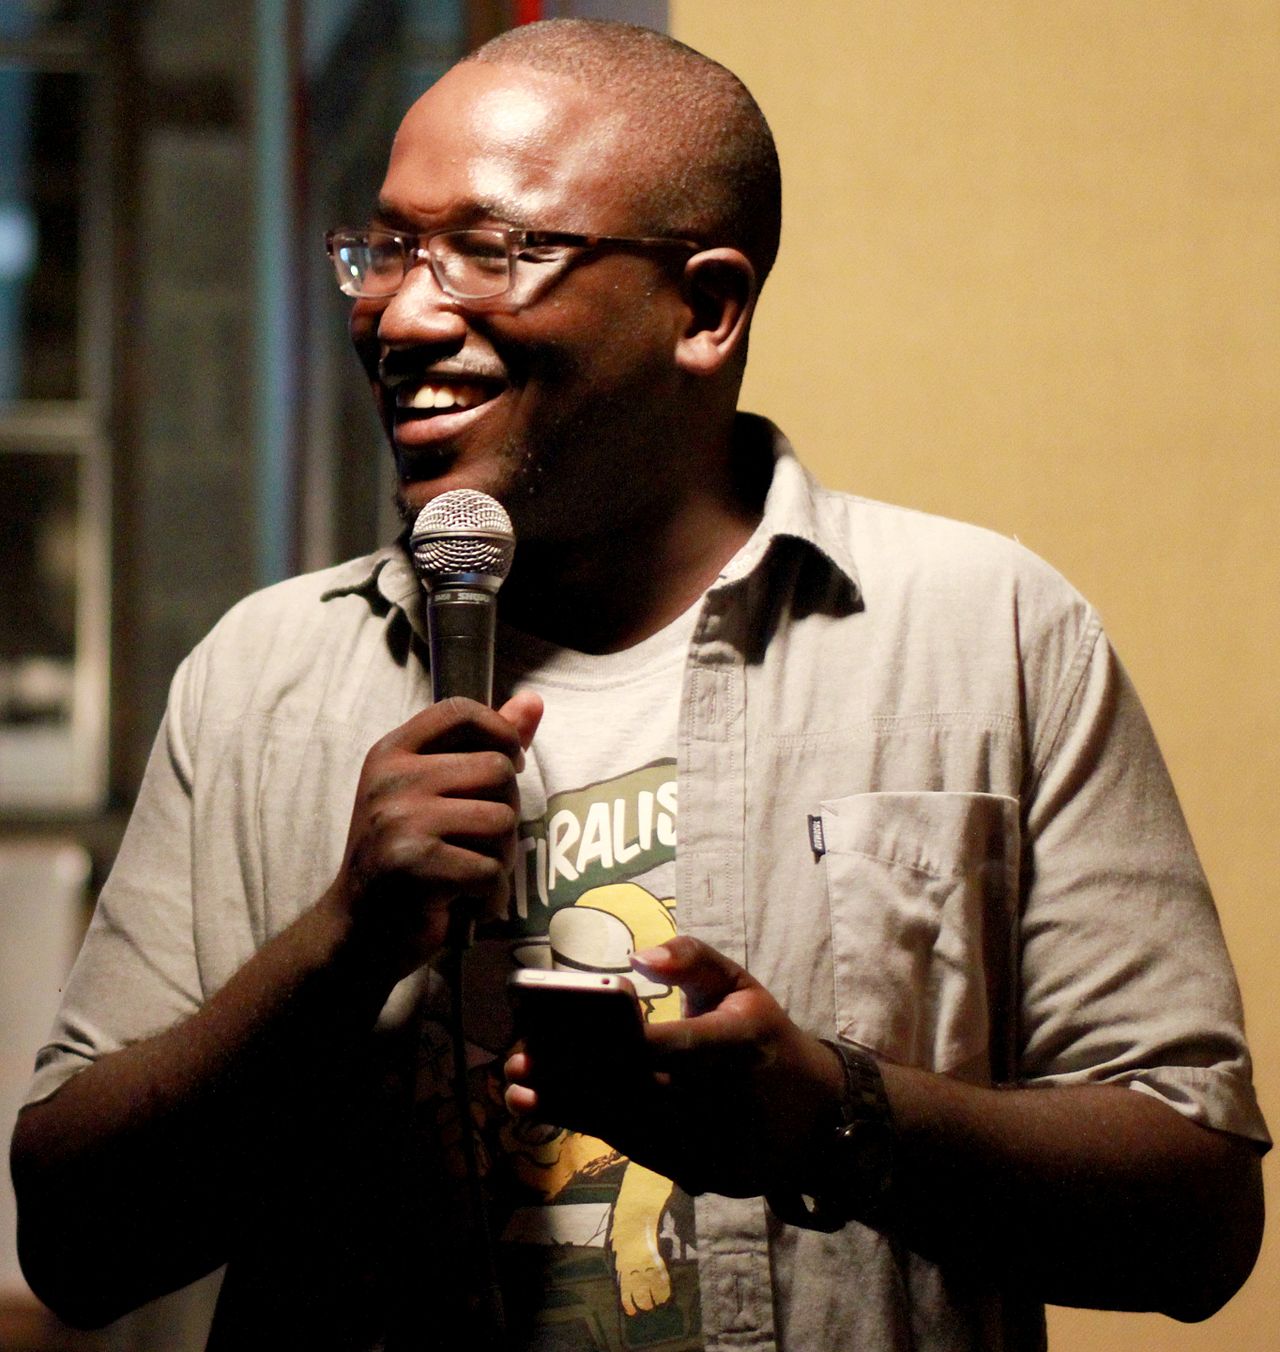 Hannibal Buress during a stand-up comedy show (October 2014).